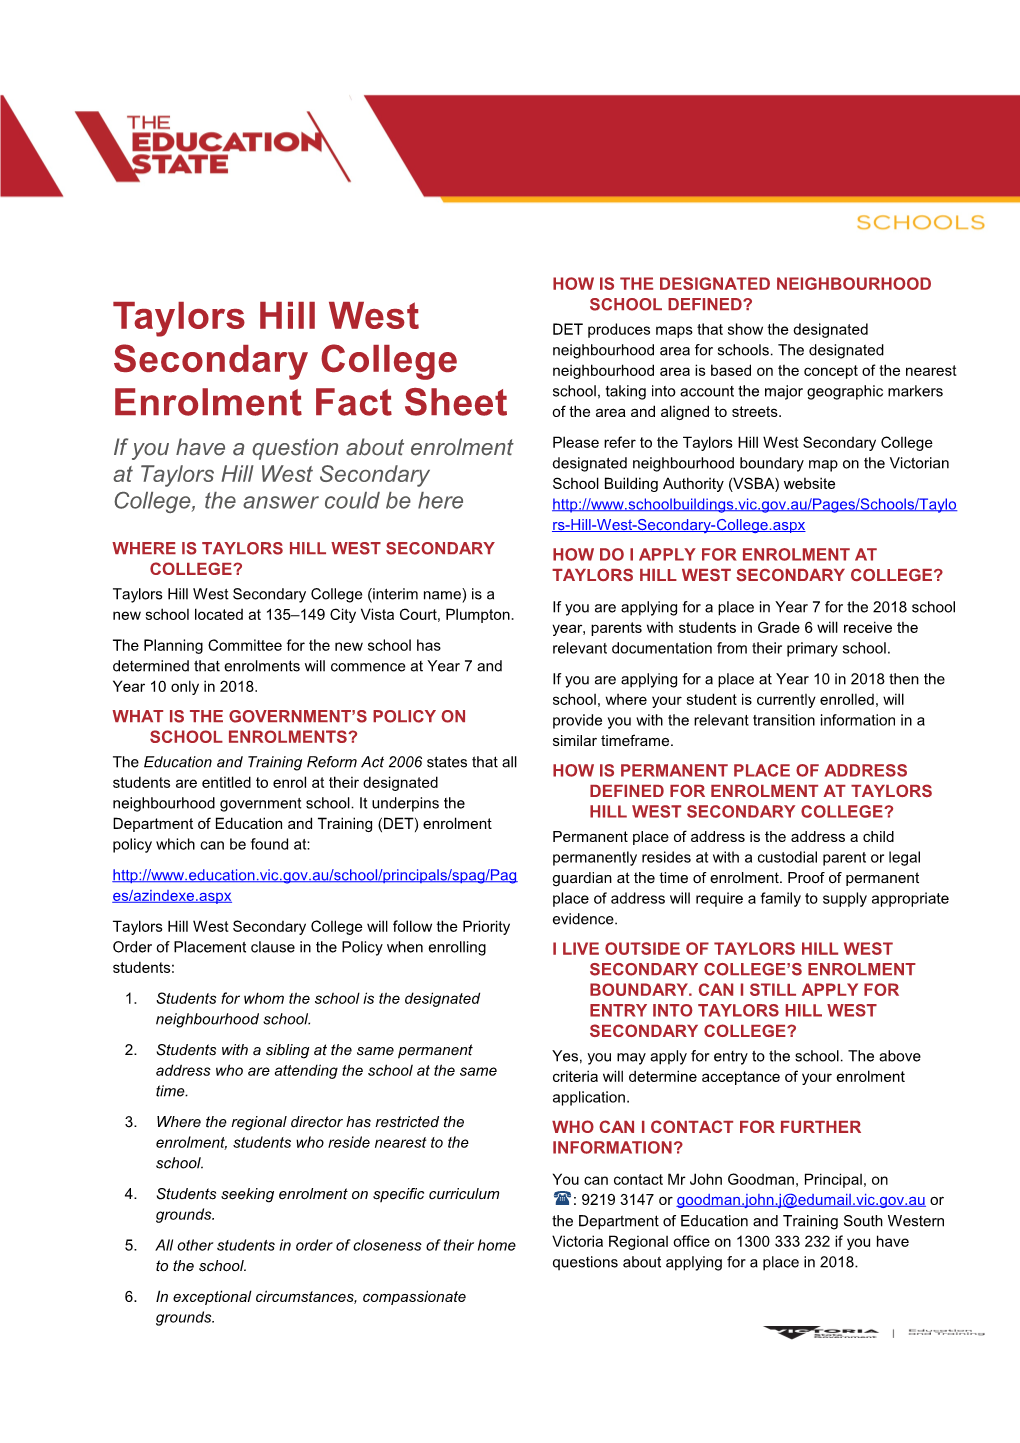 BRI011323 Attachment 1 - Education State Fact Sheet - Taylors Hill West Secondary College